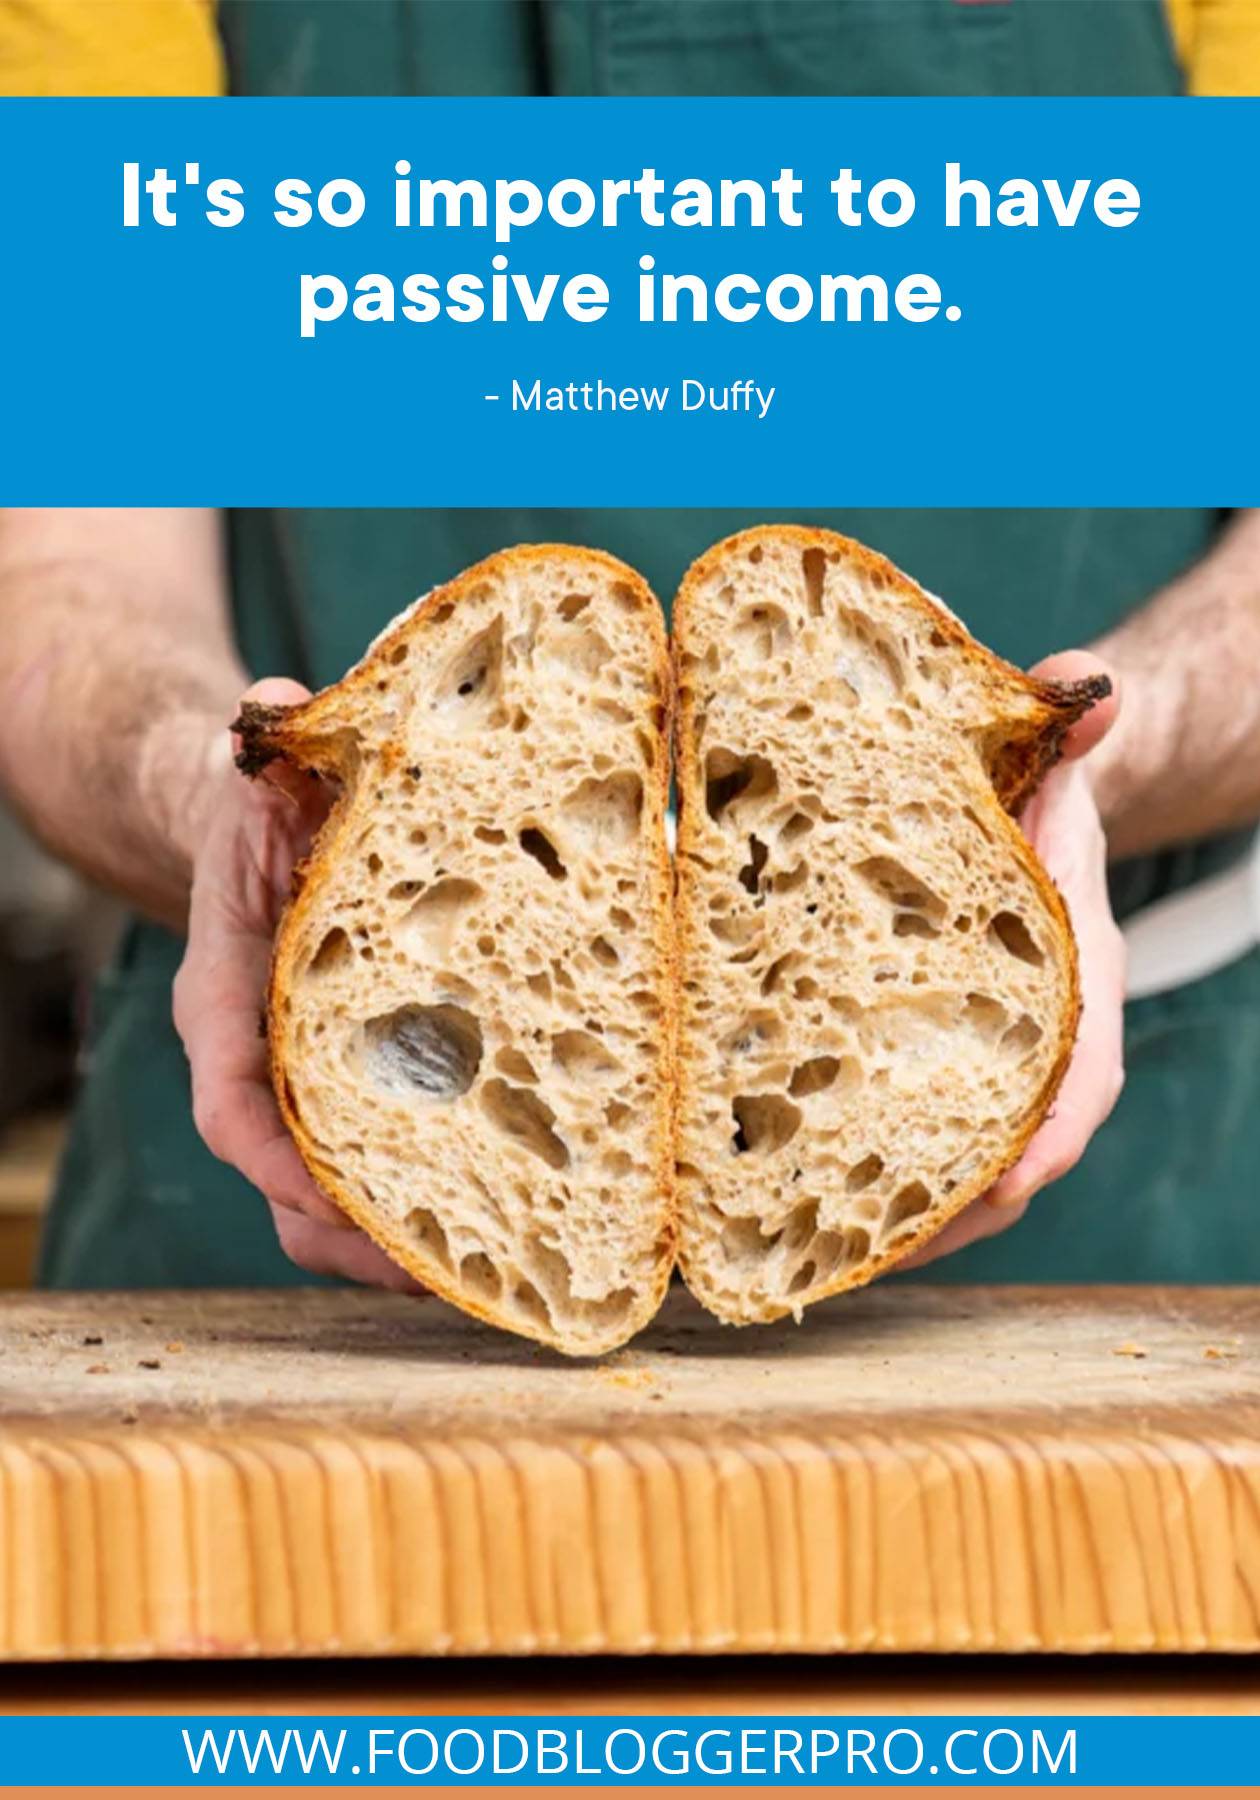 A photograph of someone holding a sliced open loaf of bread with a quote from Matthew Duffy's episode of The Food Blogger Pro Podcast that reads, "It's so important to have passive income."